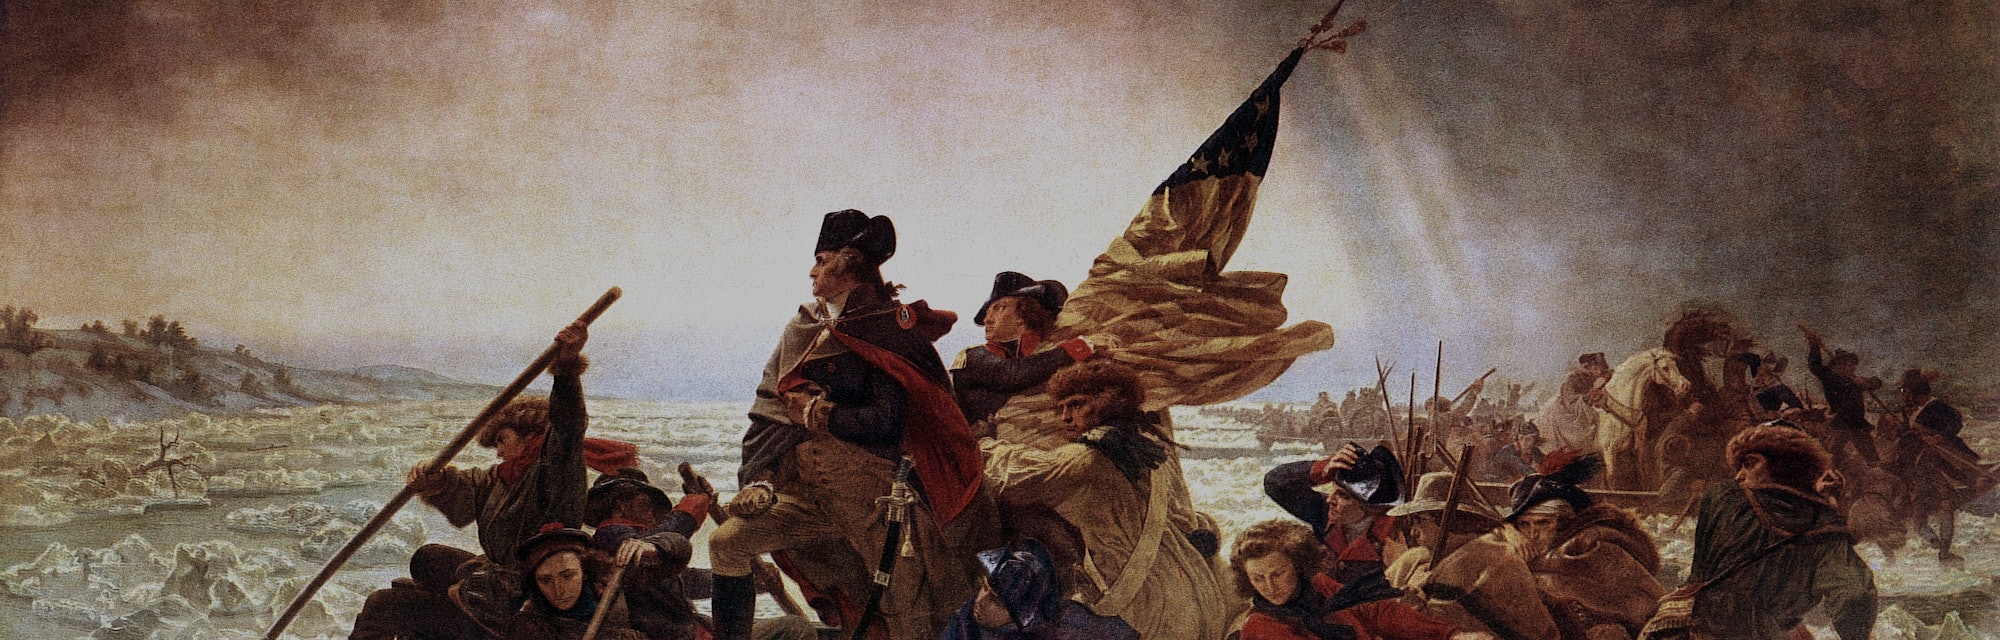 1851-ORIGINAL CAPTION READS: "Washington Crossing the Delaware," (1851) oil on canvas painted by Ema...